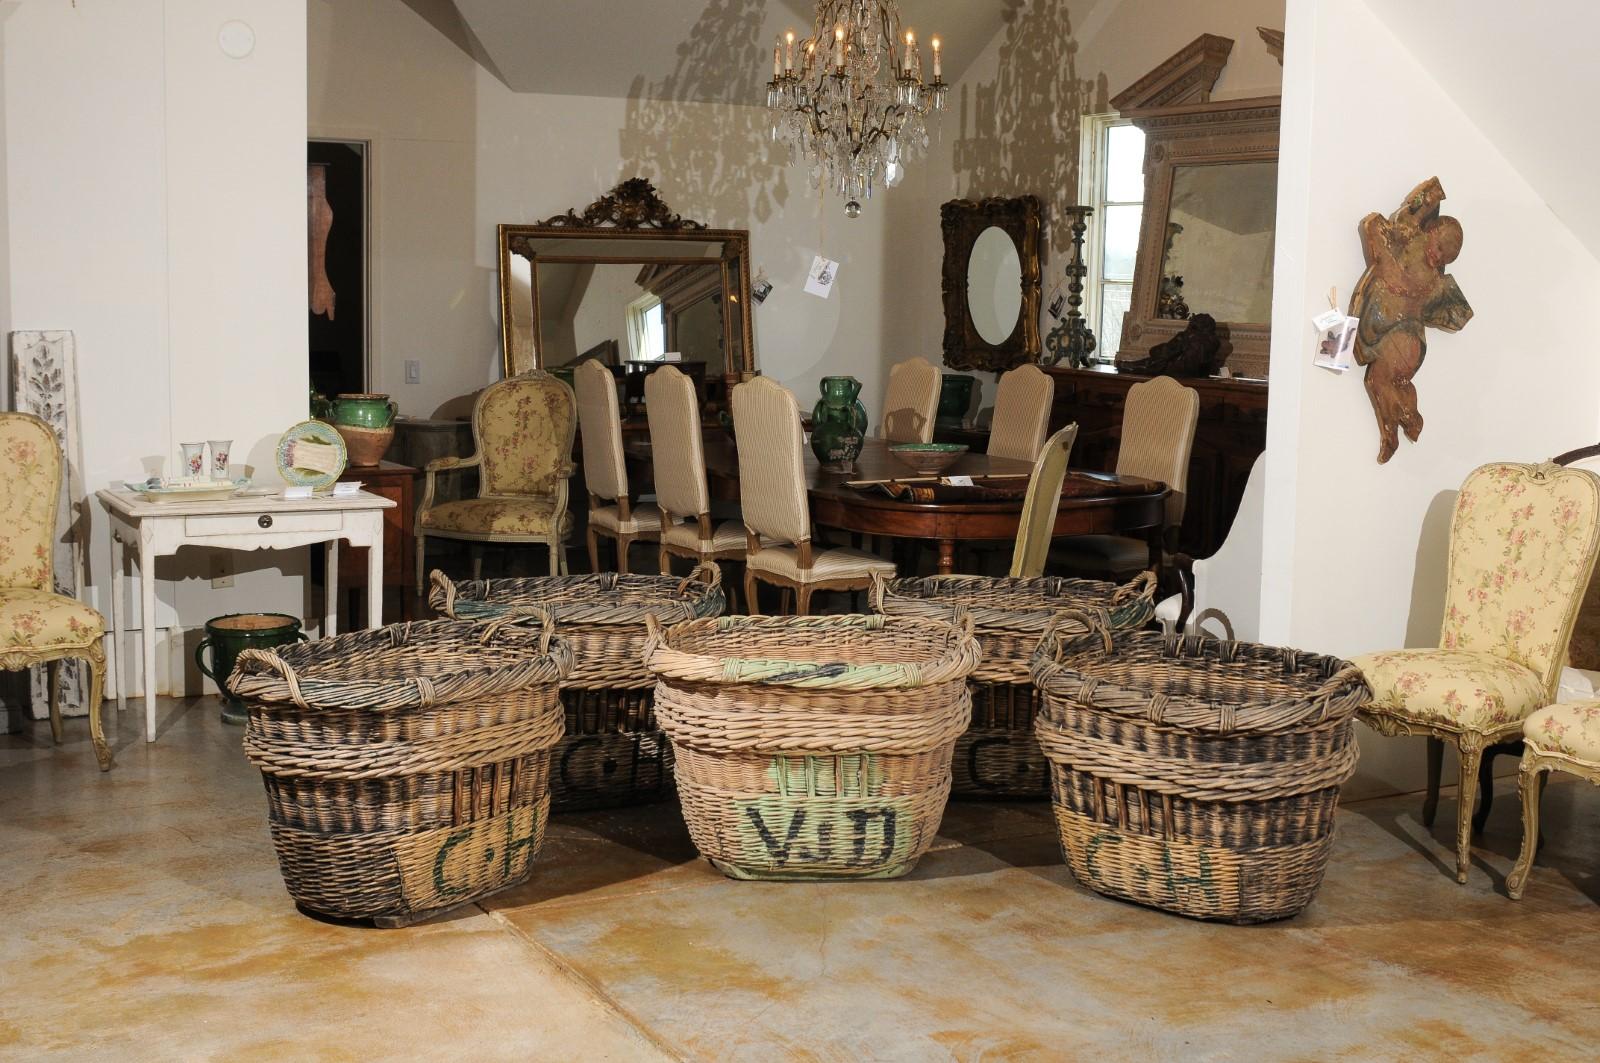 Rustic Large French Wicker Basket circa 1900 with Weathered Appearance 'One Left'